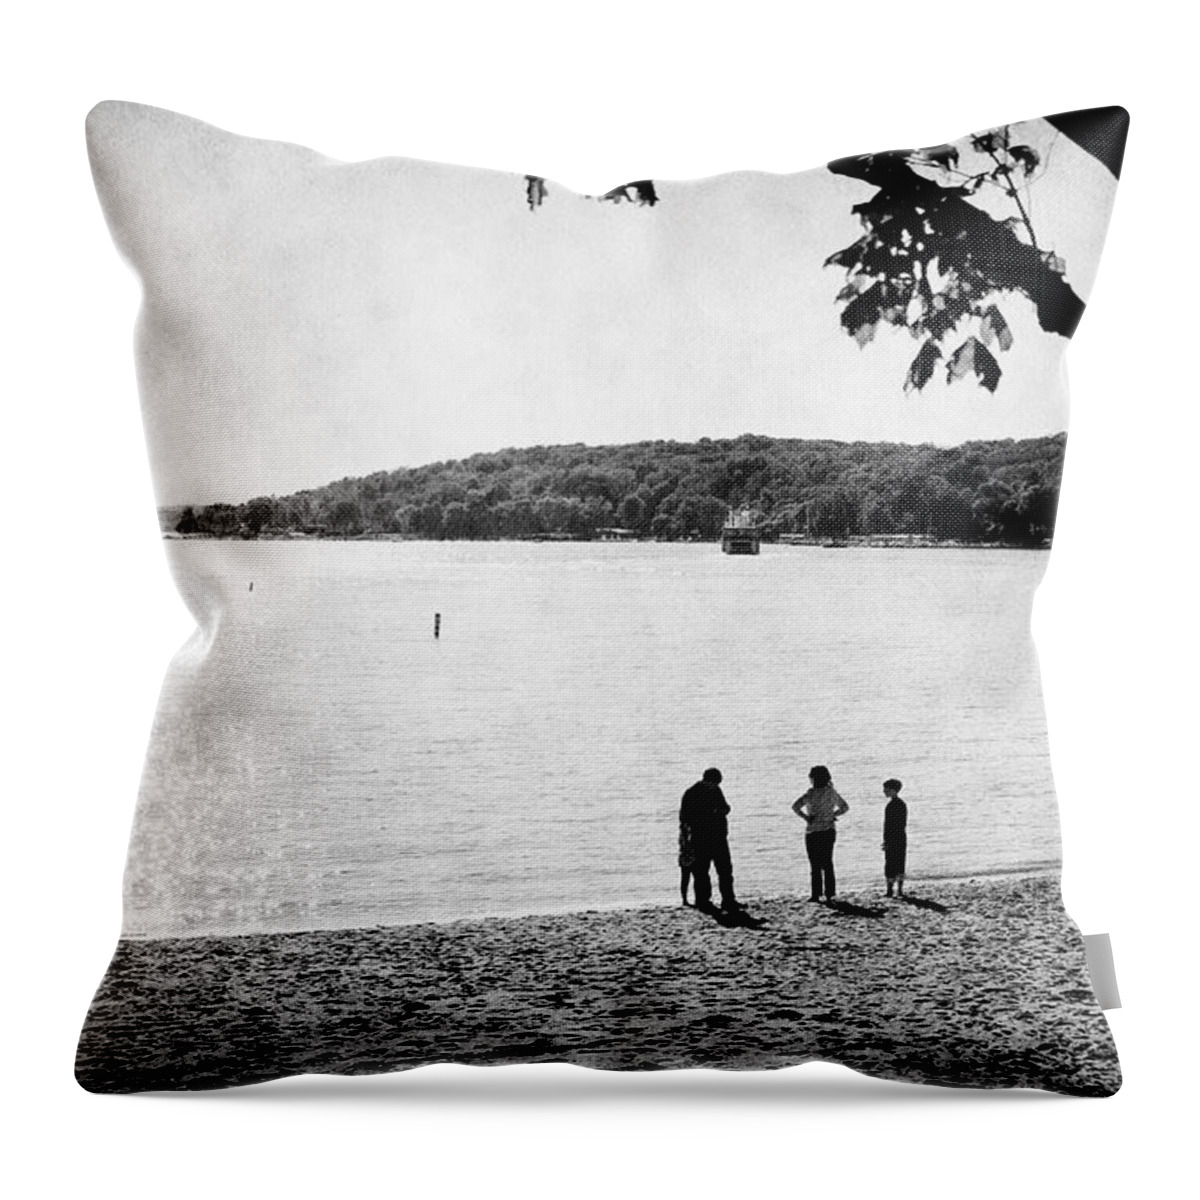 Grass Throw Pillow featuring the photograph Autumn Day by the Lake by Milena Ilieva